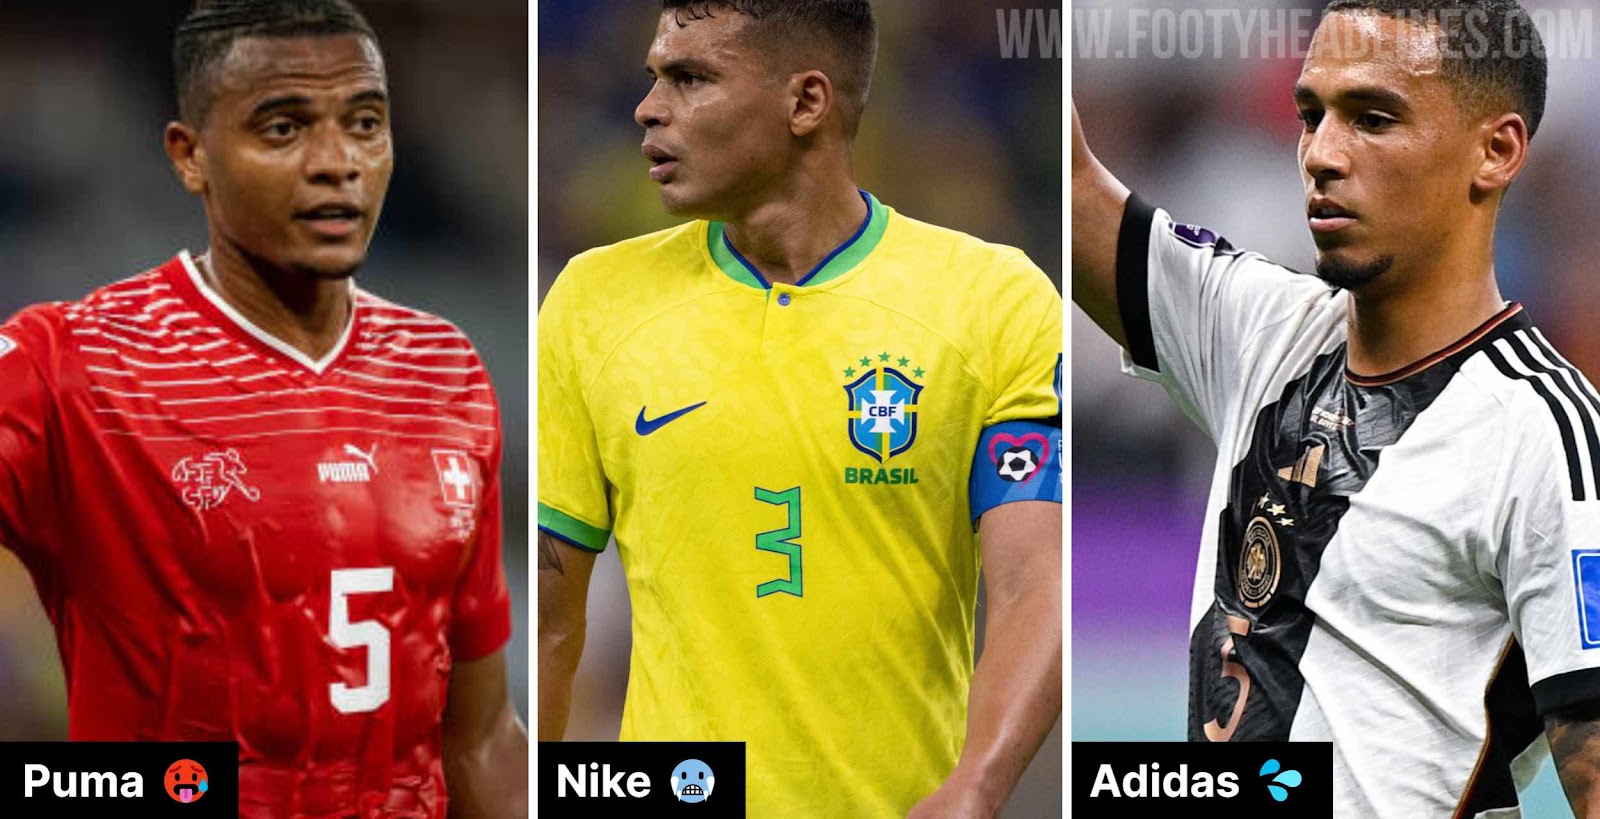 Adidas and Puma Face Off With Their 2022 World Cup Kit Designs